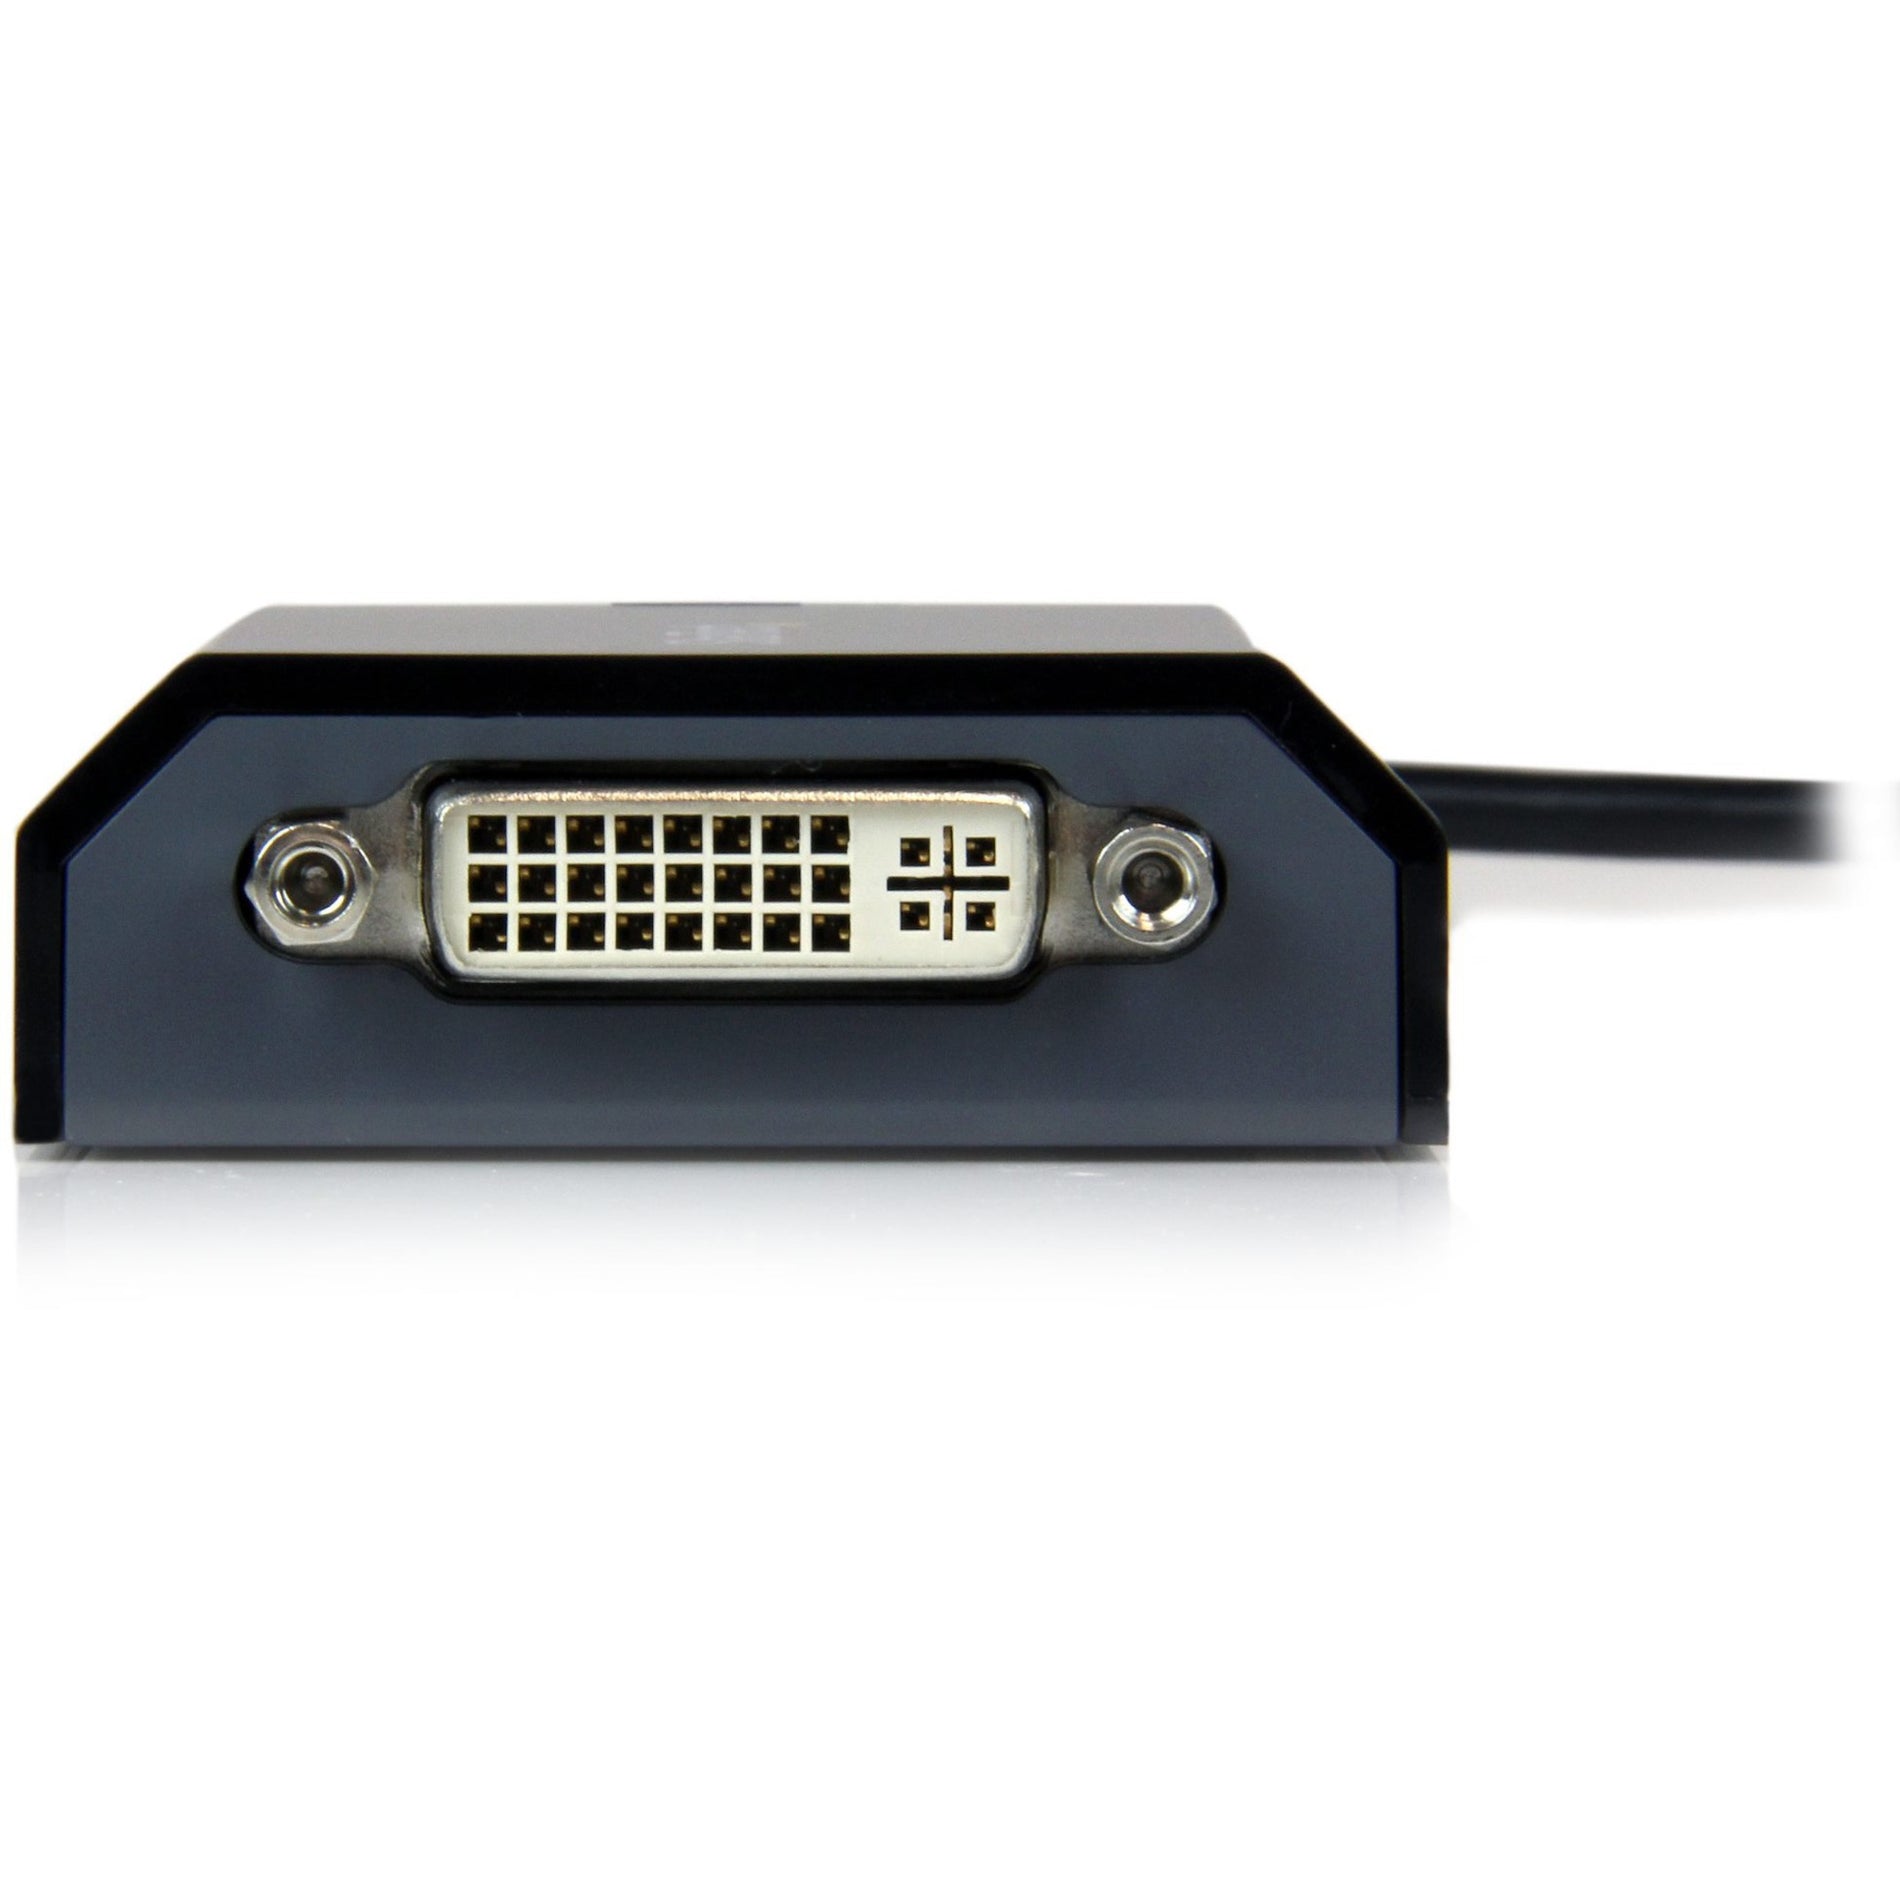 StarTech.com USB2DVIPRO2 USB to DVI Adapter - External USB Video Graphics Card for PC and MAC- 1920x1200, Warranty: 2 Year